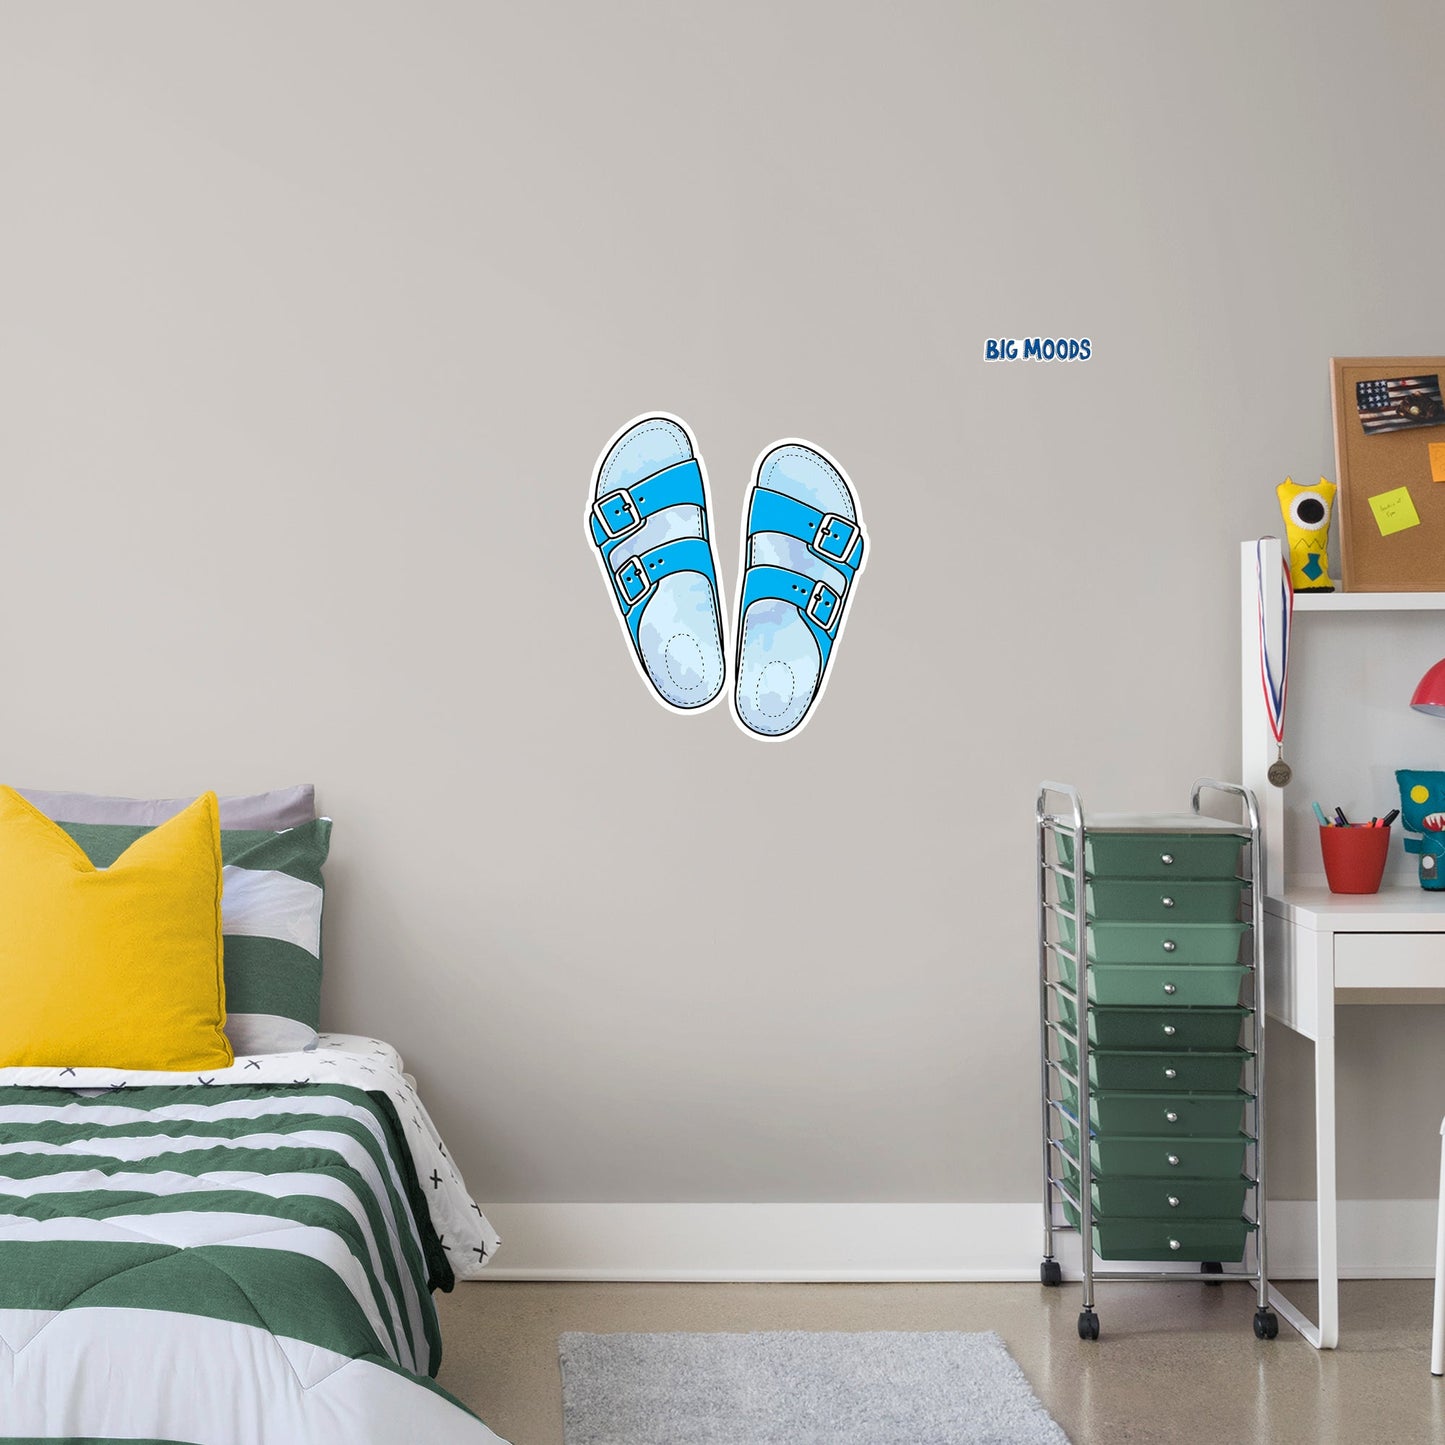 Sandals (Blue)        - Officially Licensed Big Moods Removable     Adhesive Decal